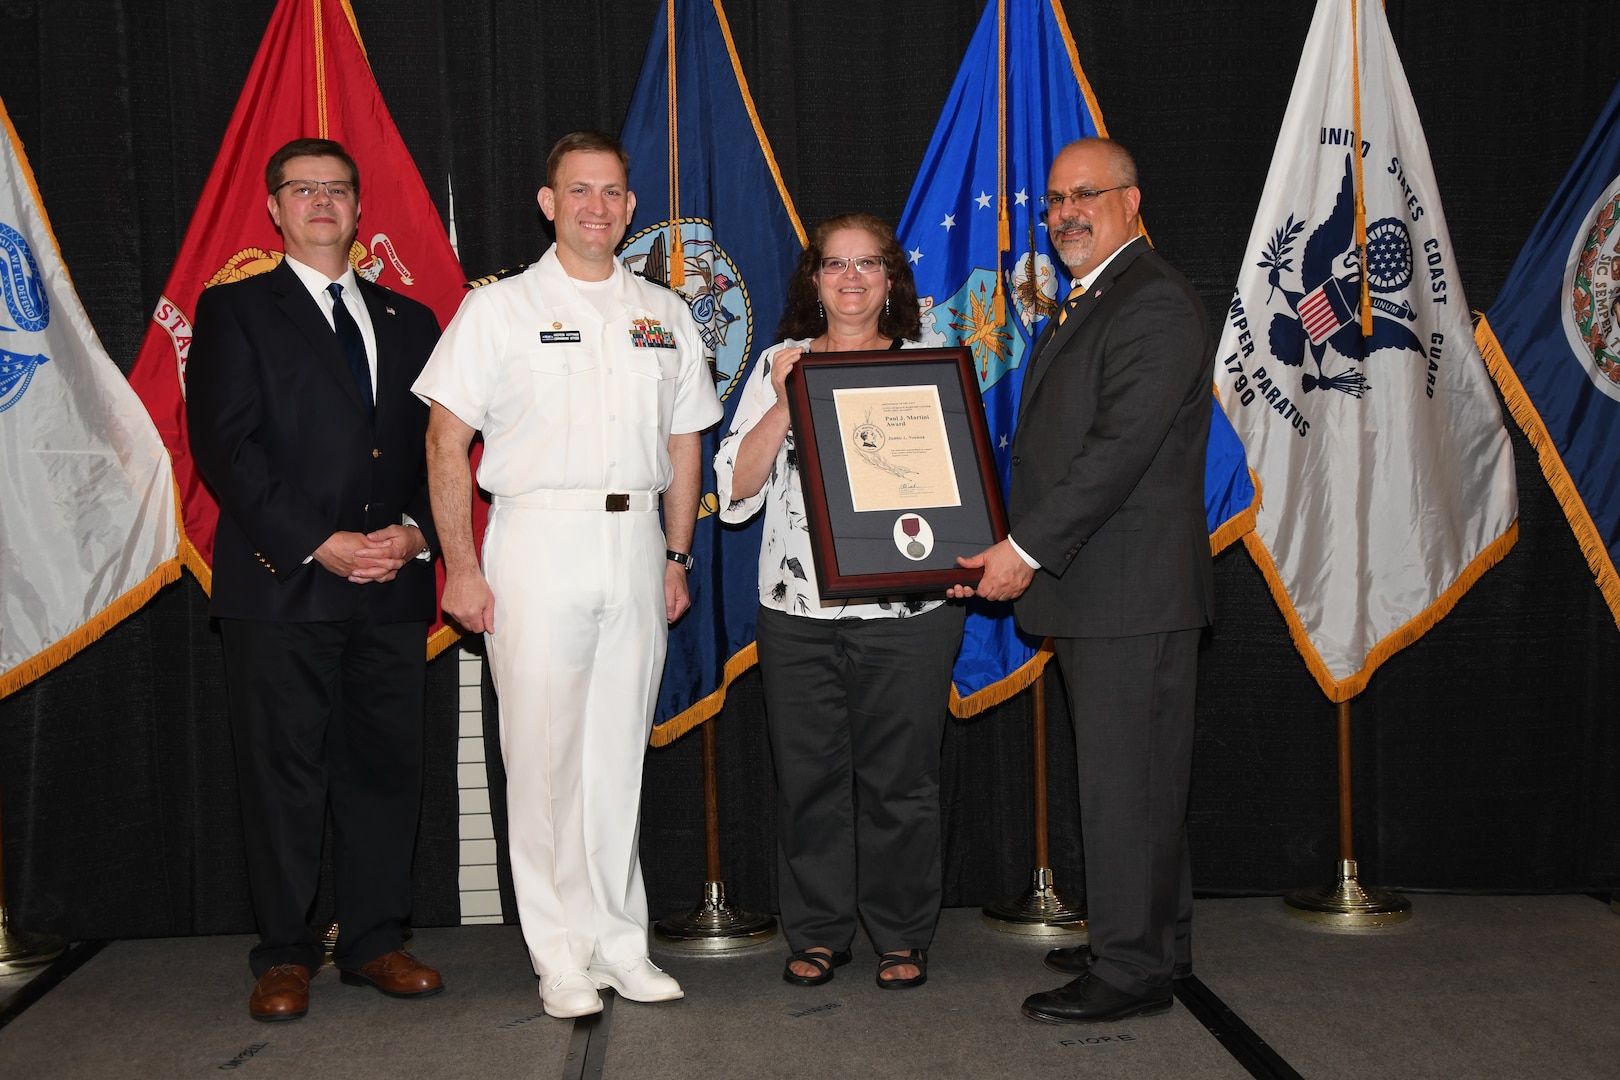 IMAGE: Debbie Newkirk is presented the Paul J. Martini Award at Naval Surface Warfare Center Dahlgren Division's annual awards ceremony, Apr. 26 at the Fredericksburg Expo and Conference Center.

The award is named in honor of Paul J. Martini, who was head of the Engineering Support Directorate of the Naval Ordnance Laboratory from November 1951 to December 1973.